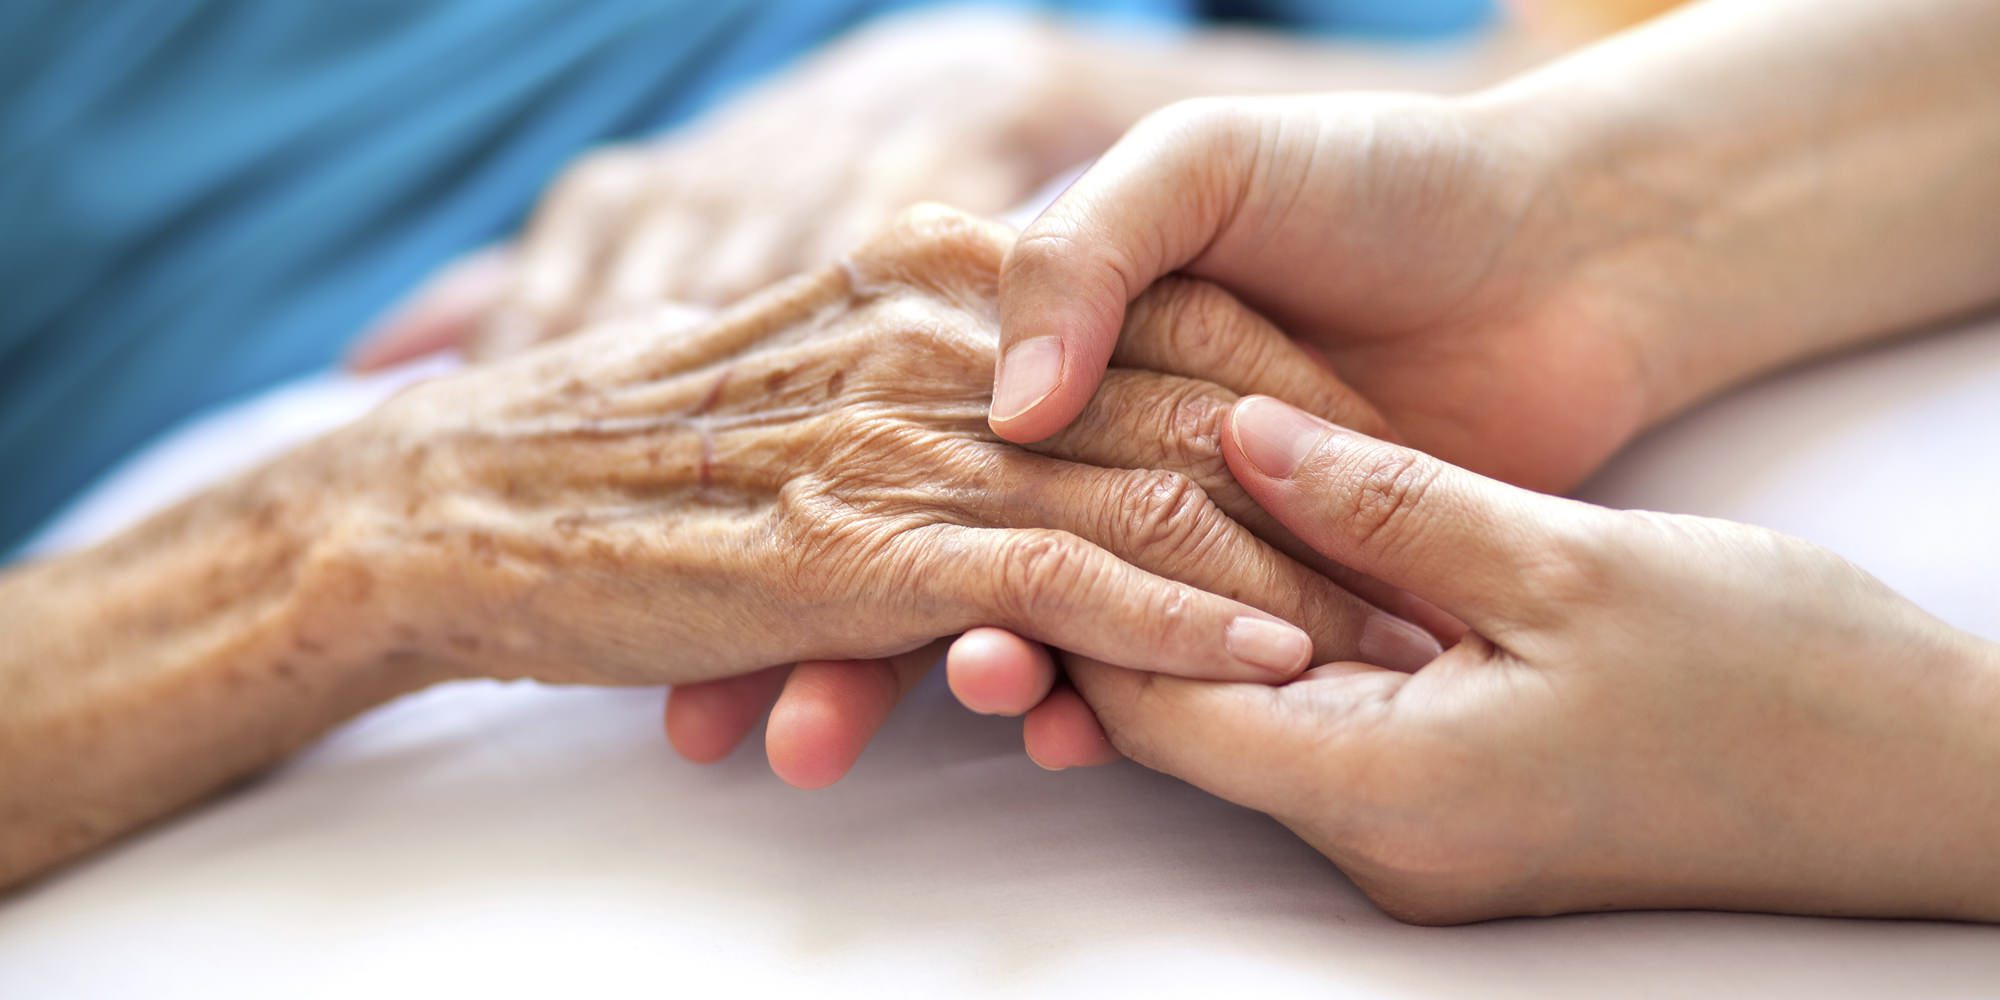 A person holding an elderly hand over another 's arm.